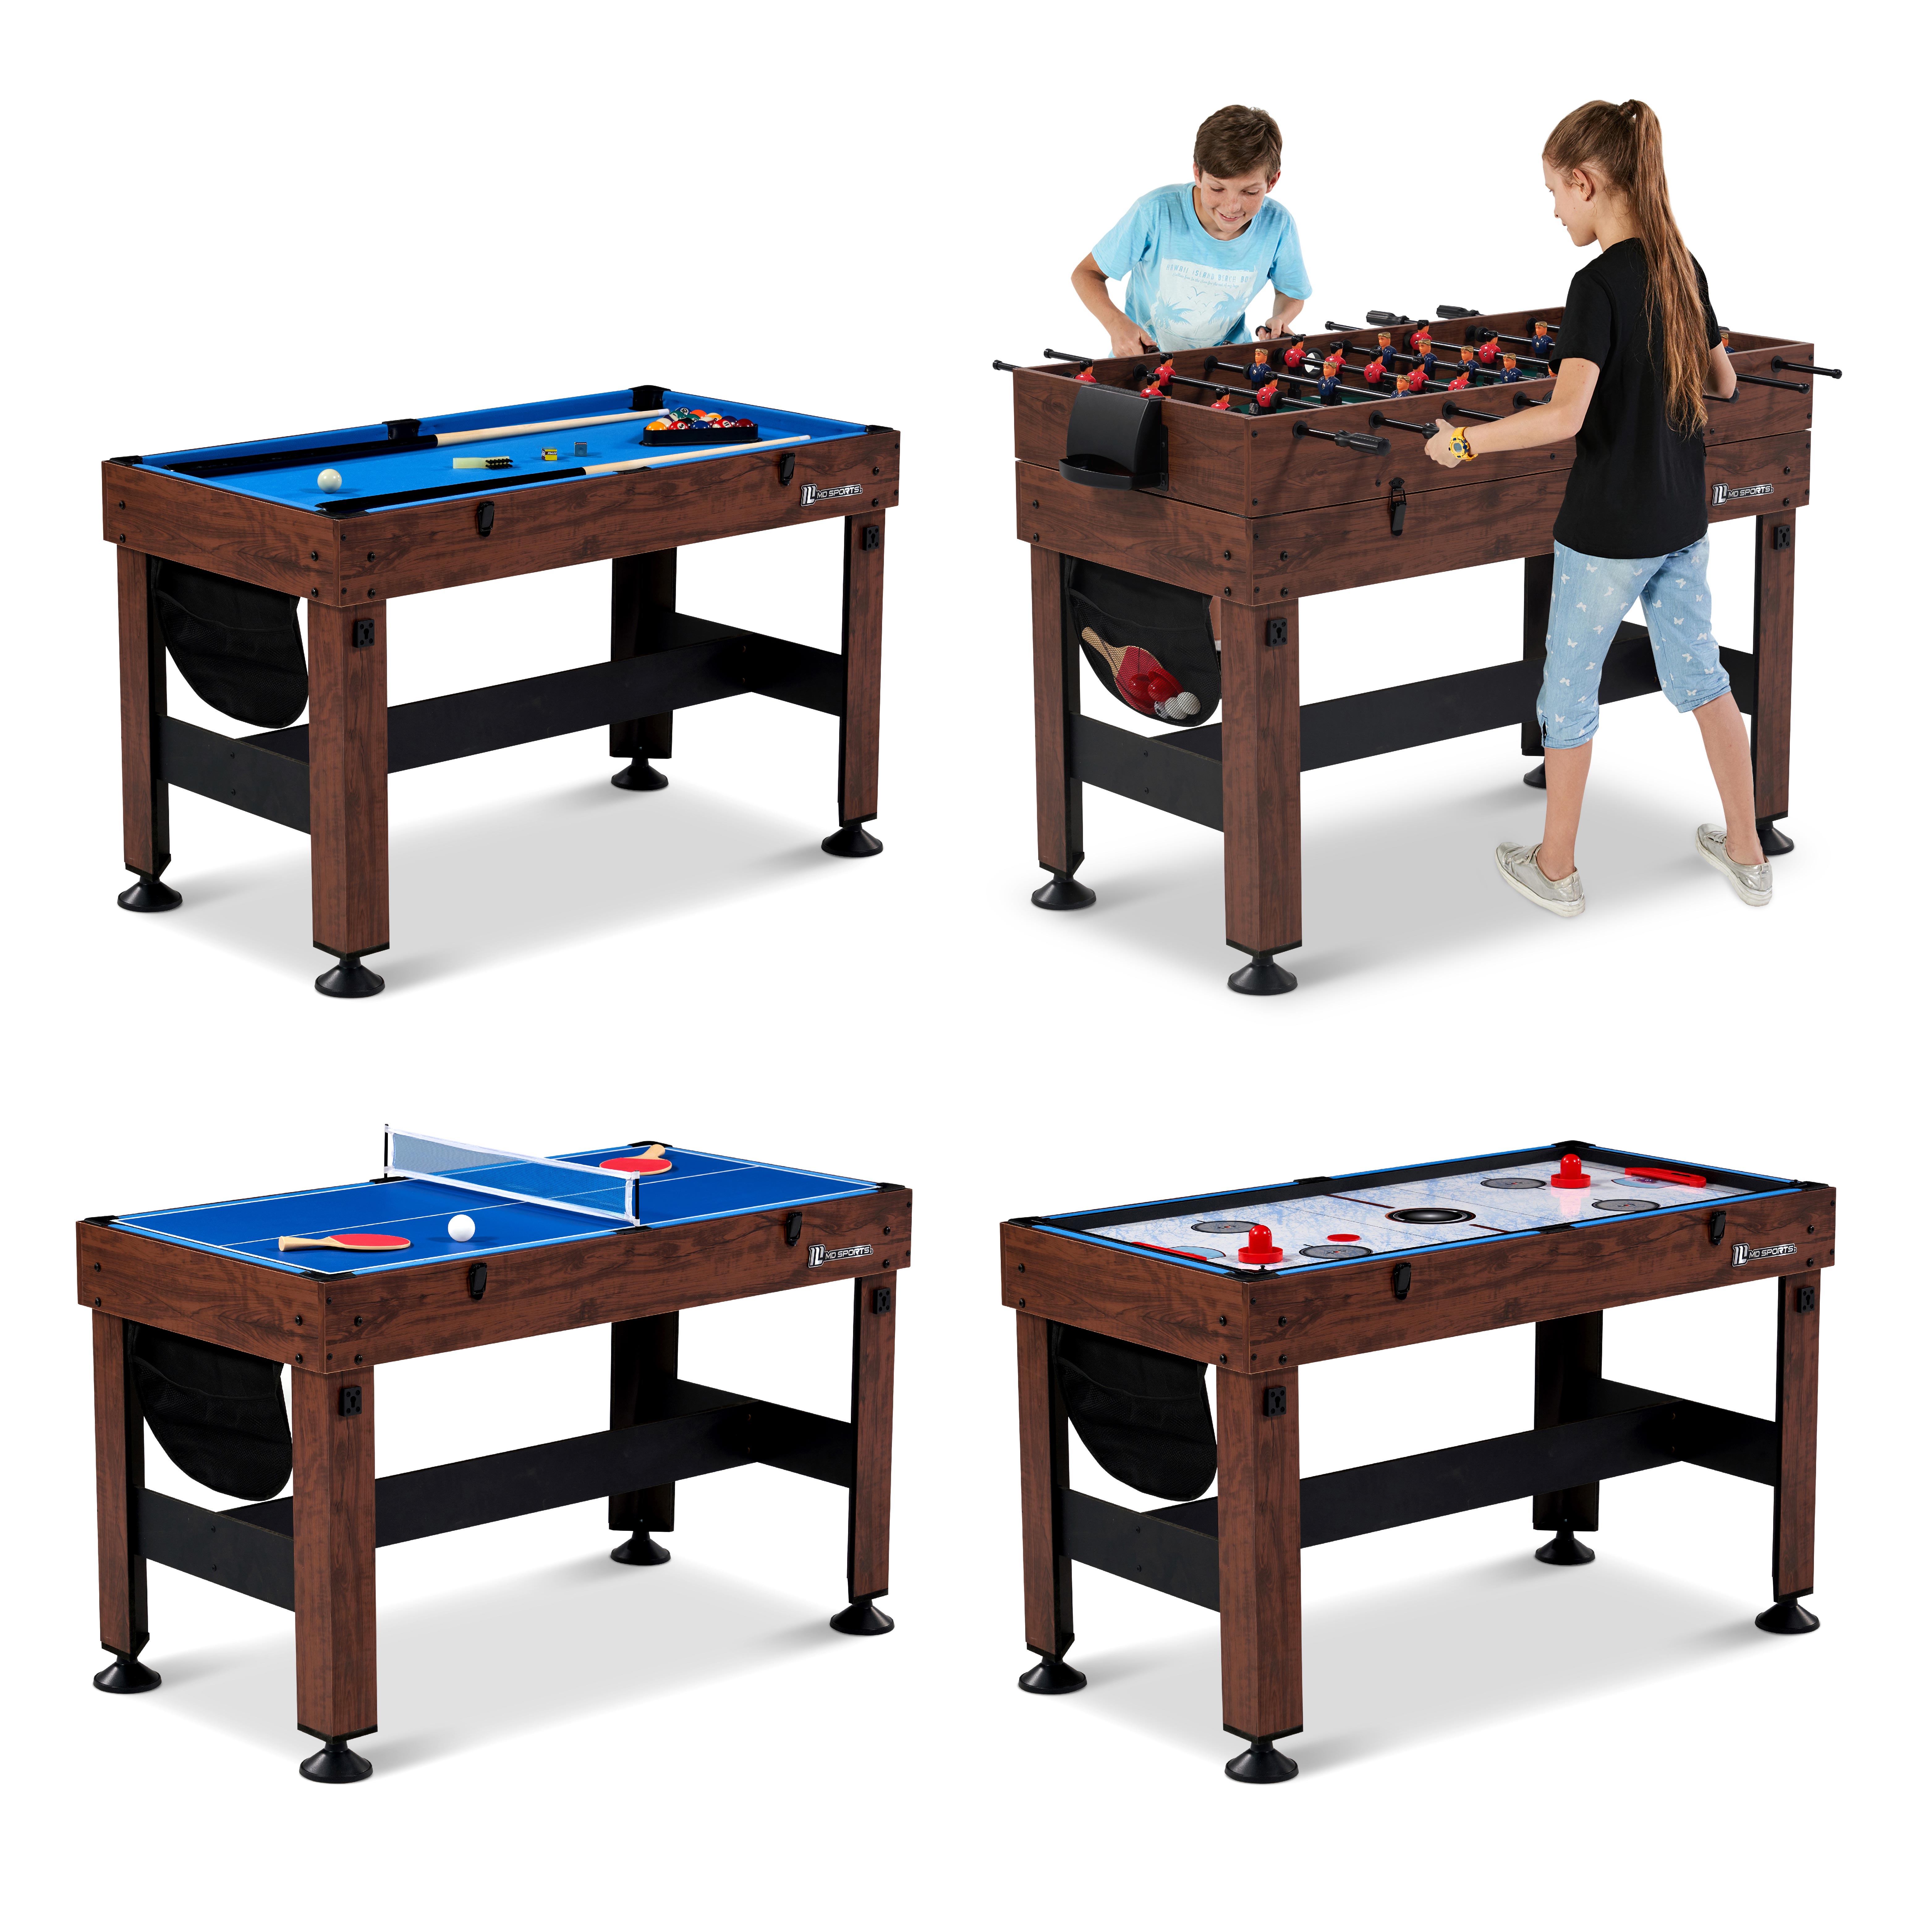 MD Sports 54" 4 in 1 Combo Game Table, Foosball, Hockey, Table Tennis, Billiards - image 1 of 13